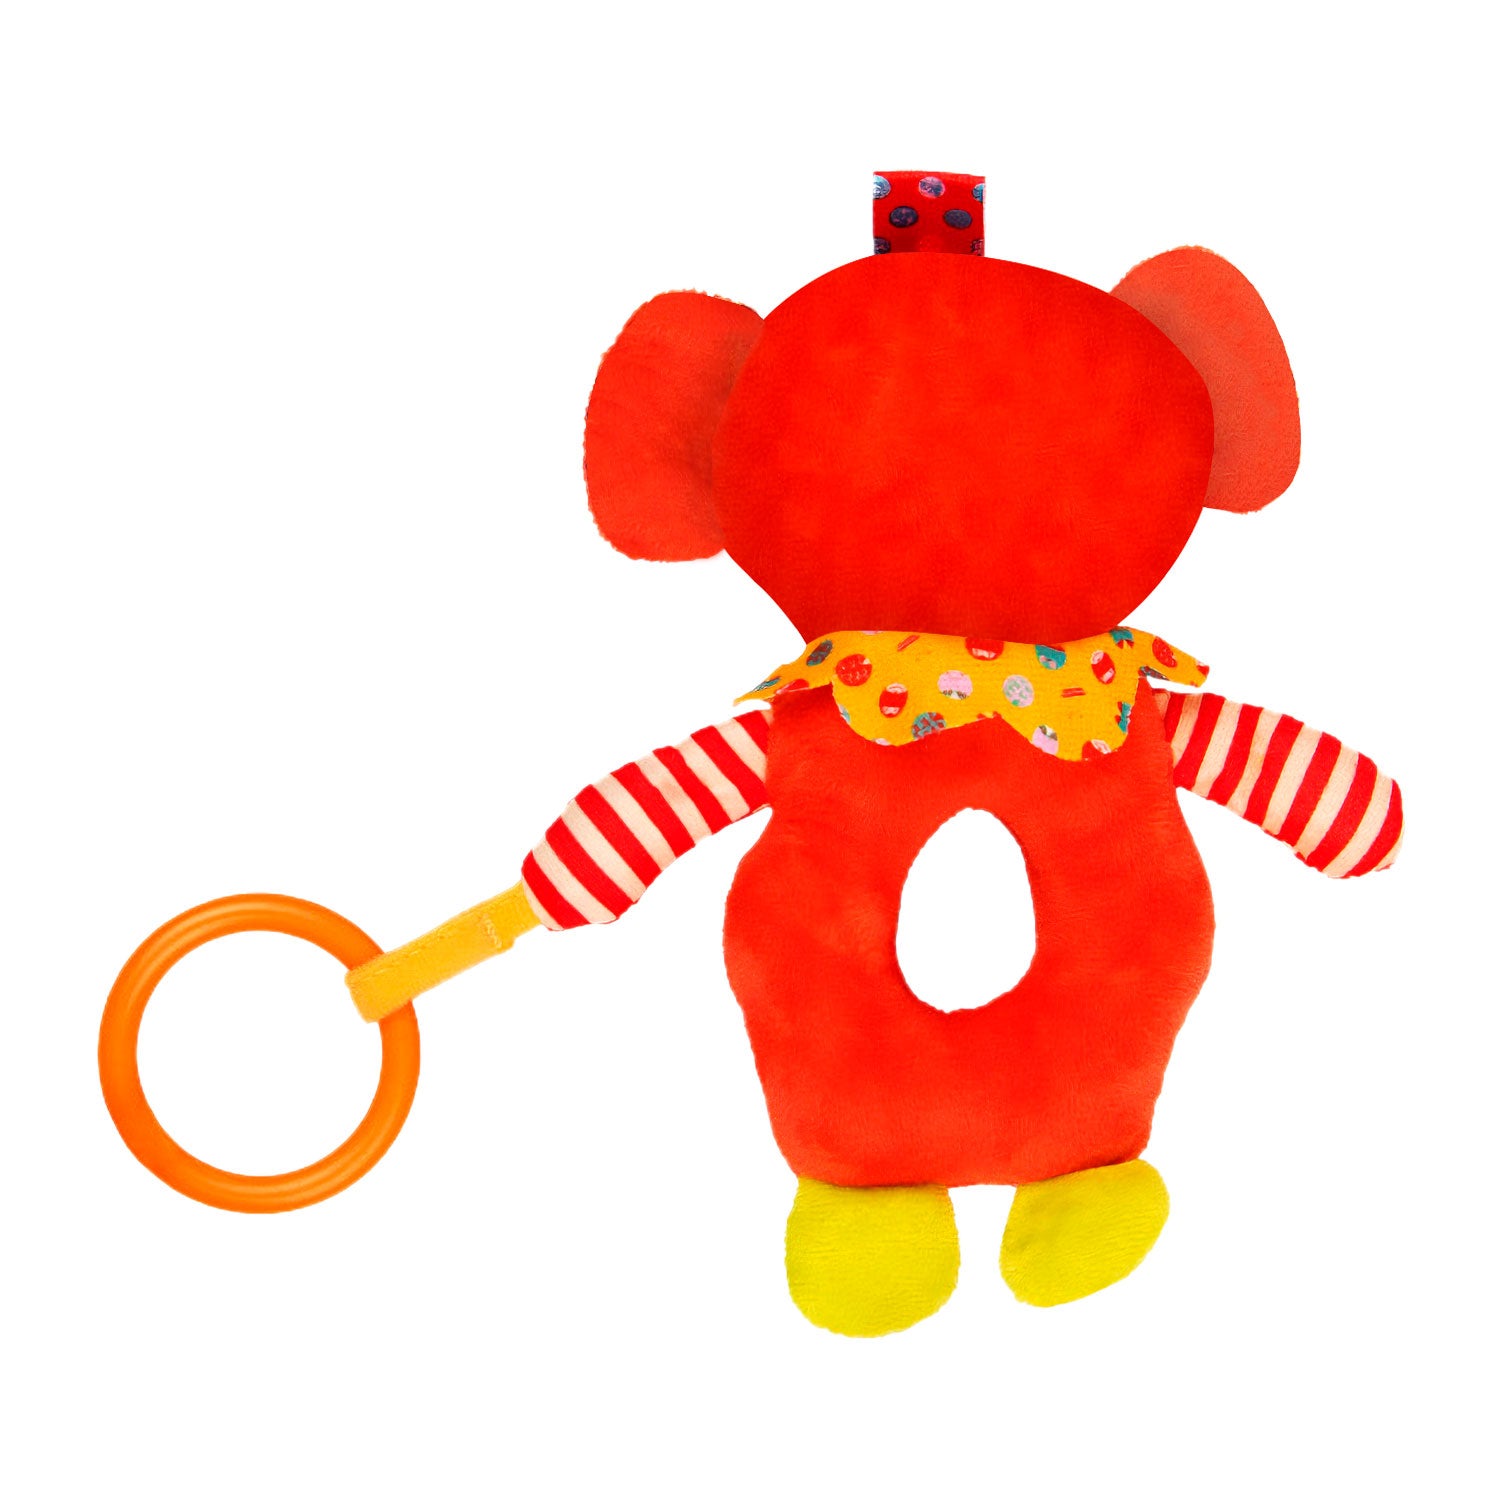 Baby Moo Monkey Rustle Paper Handheld Rattle Toy - Red